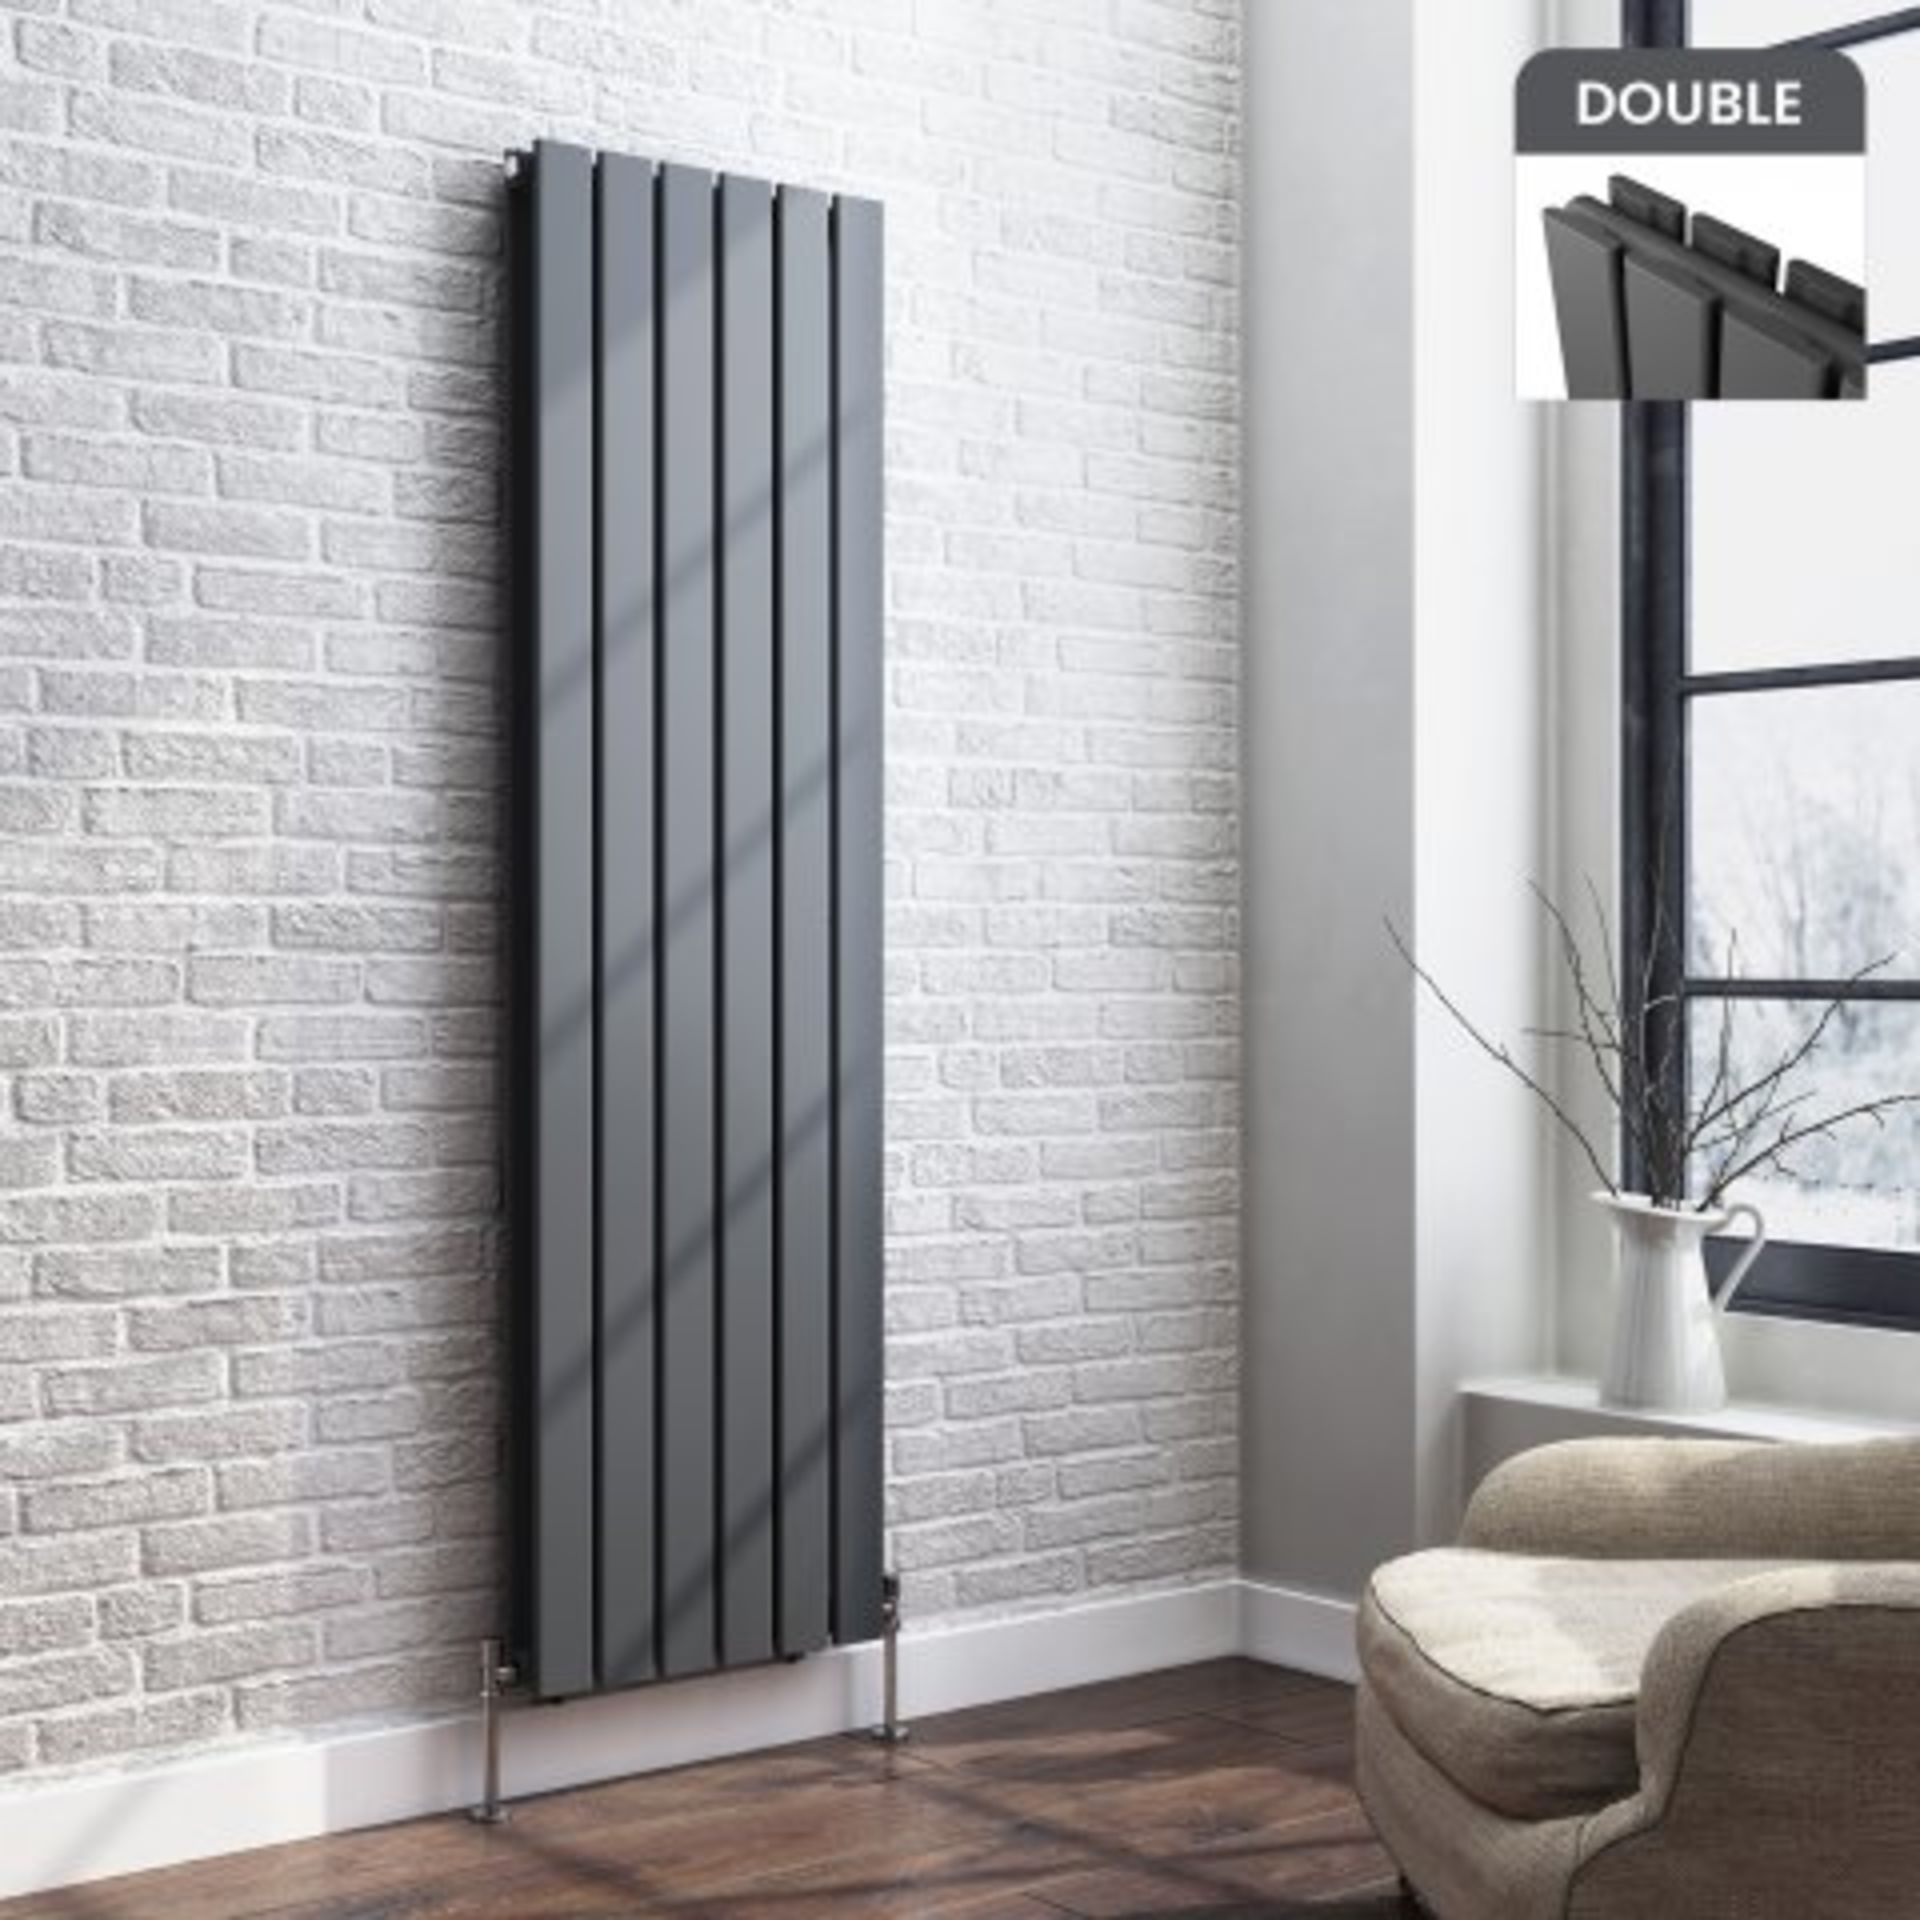 (N12) 1600x452mm Anthracite Double Flat Panel Vertical Radiator - Thera Range. RRP £474.99. Our